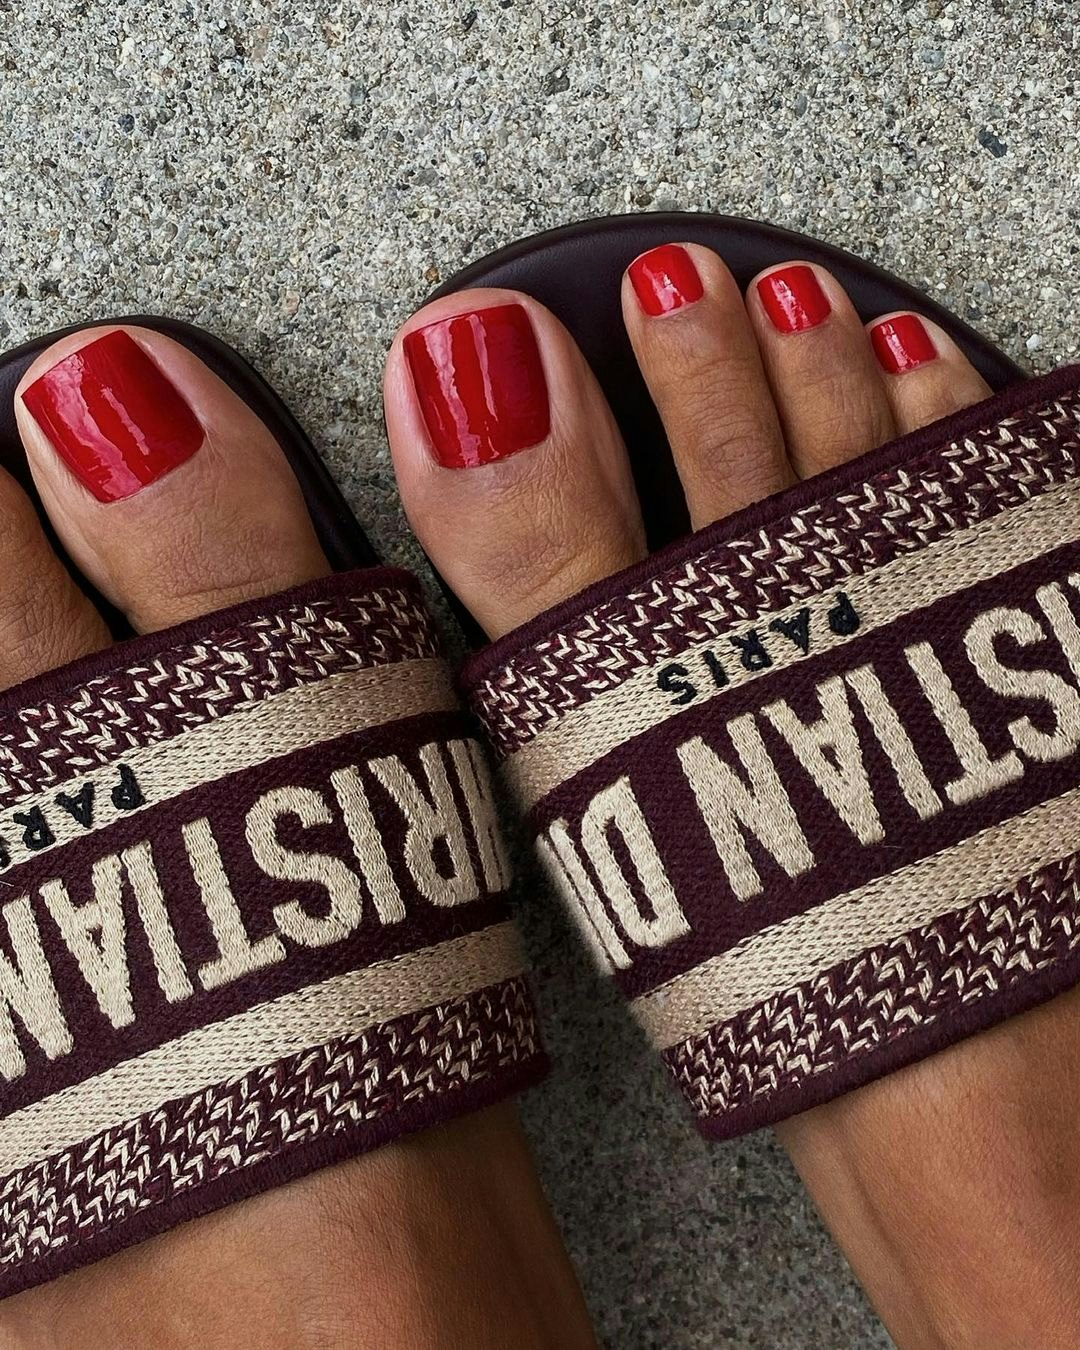 Is Nail Polish Toxic for Your Toenails?